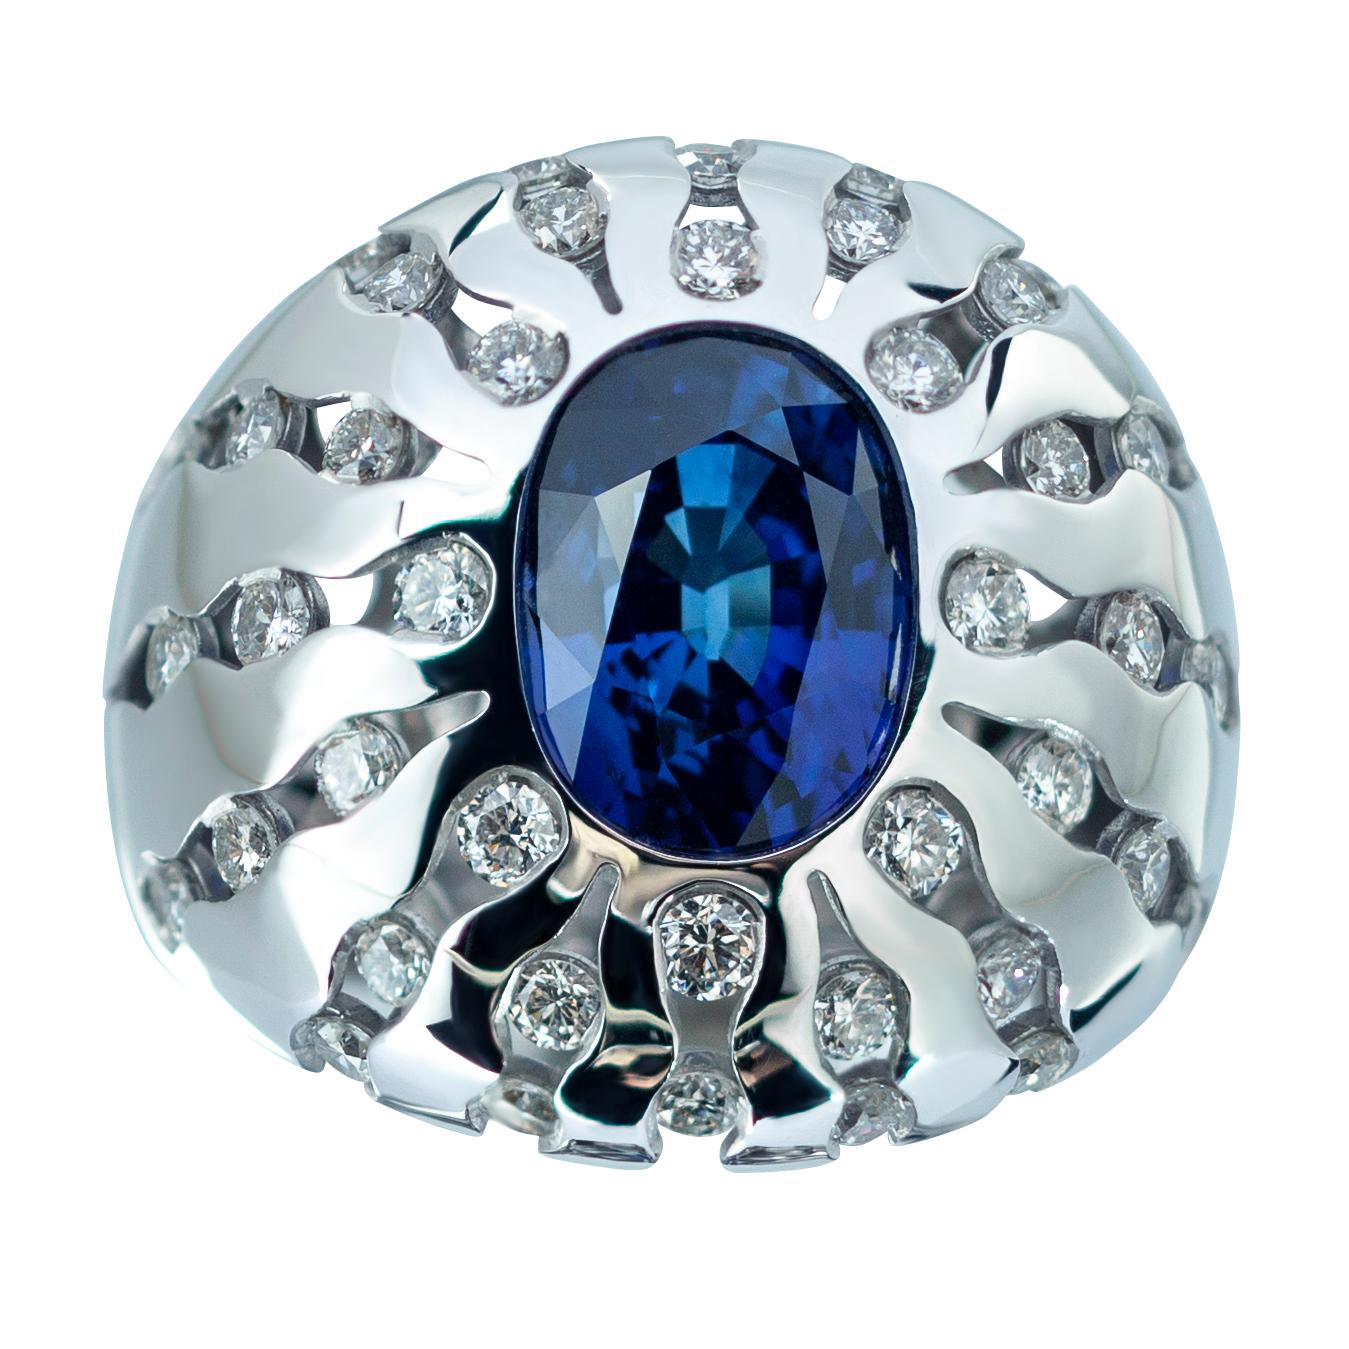 GRS Certified 6.03 Carat Royal Blue Sapphire Diamonds 18 Karat White Gold Ring
Despite the fact that this Royal Blue Sapphire totaling 6.03 Ct  is self-sufficient, paired with scintillating 42 Diamonds totaling 2.24 Ct, it further increases its